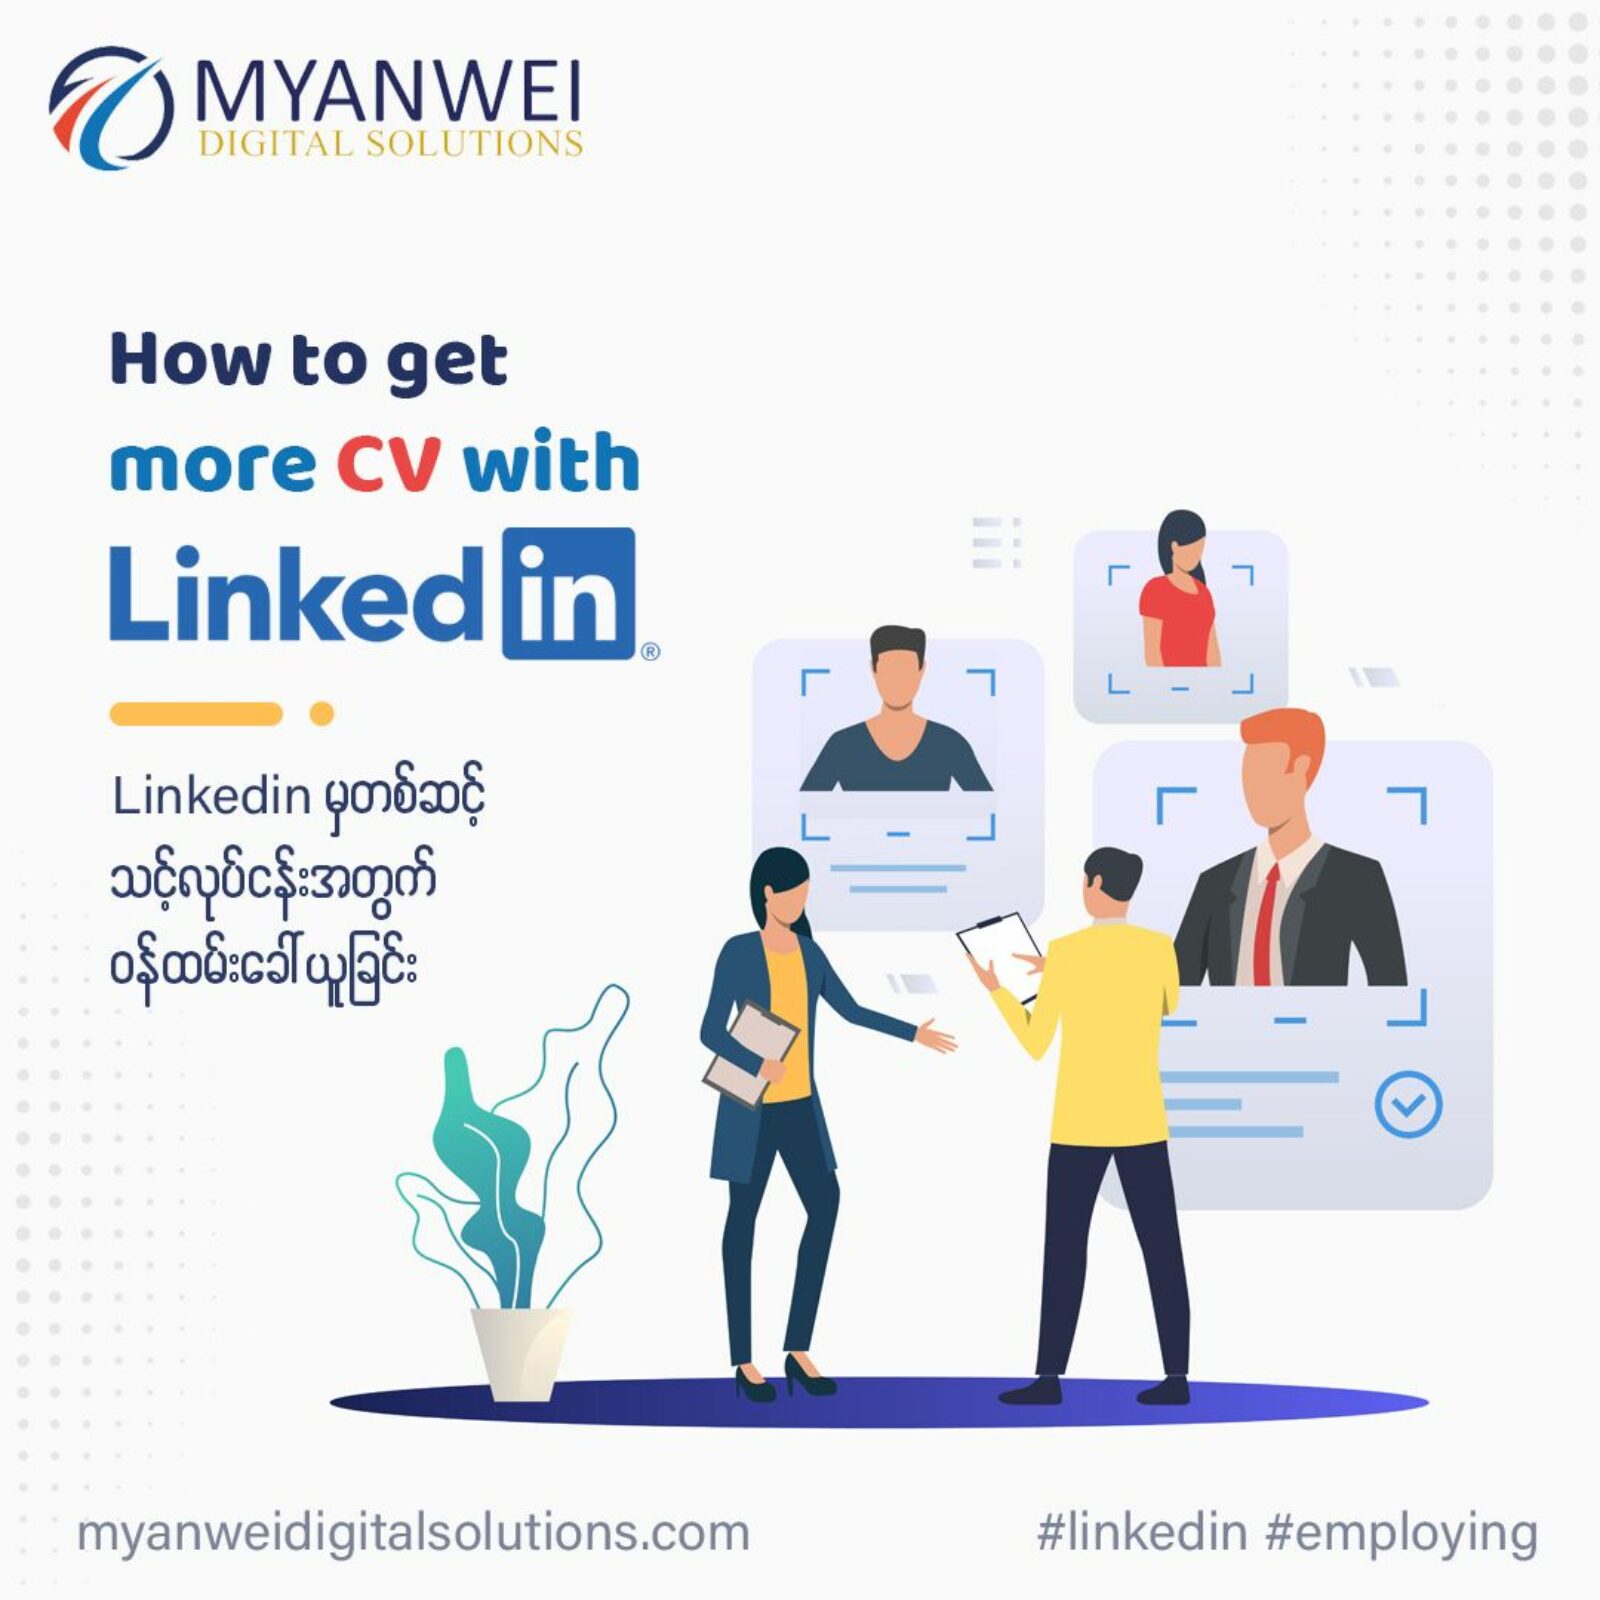 Vector photo of how to get more CV with LinkedIn - Myanwei Digital Solutions